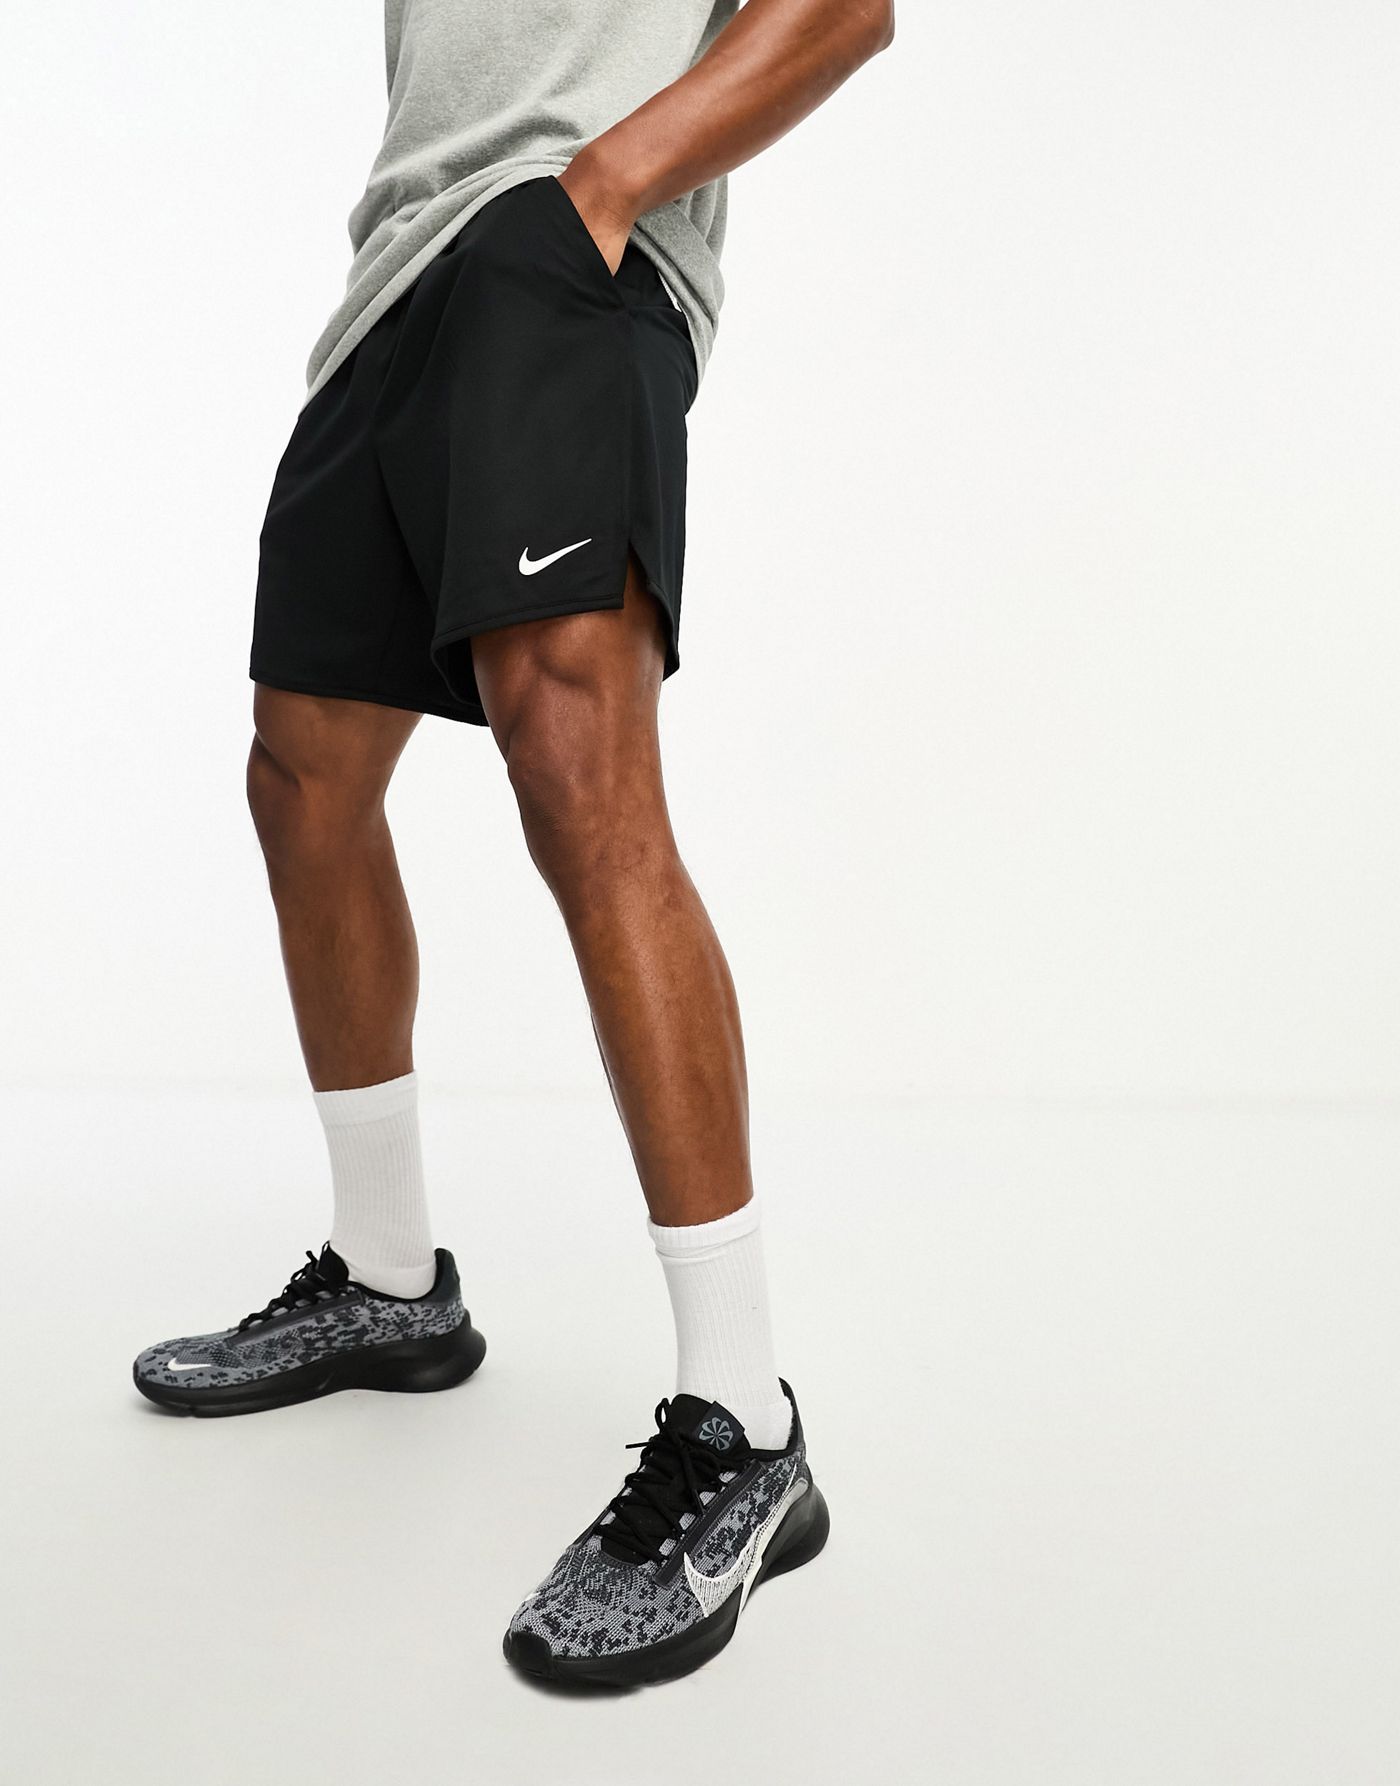  Nike Training Dri-FIT Totality knit 7in short in black 